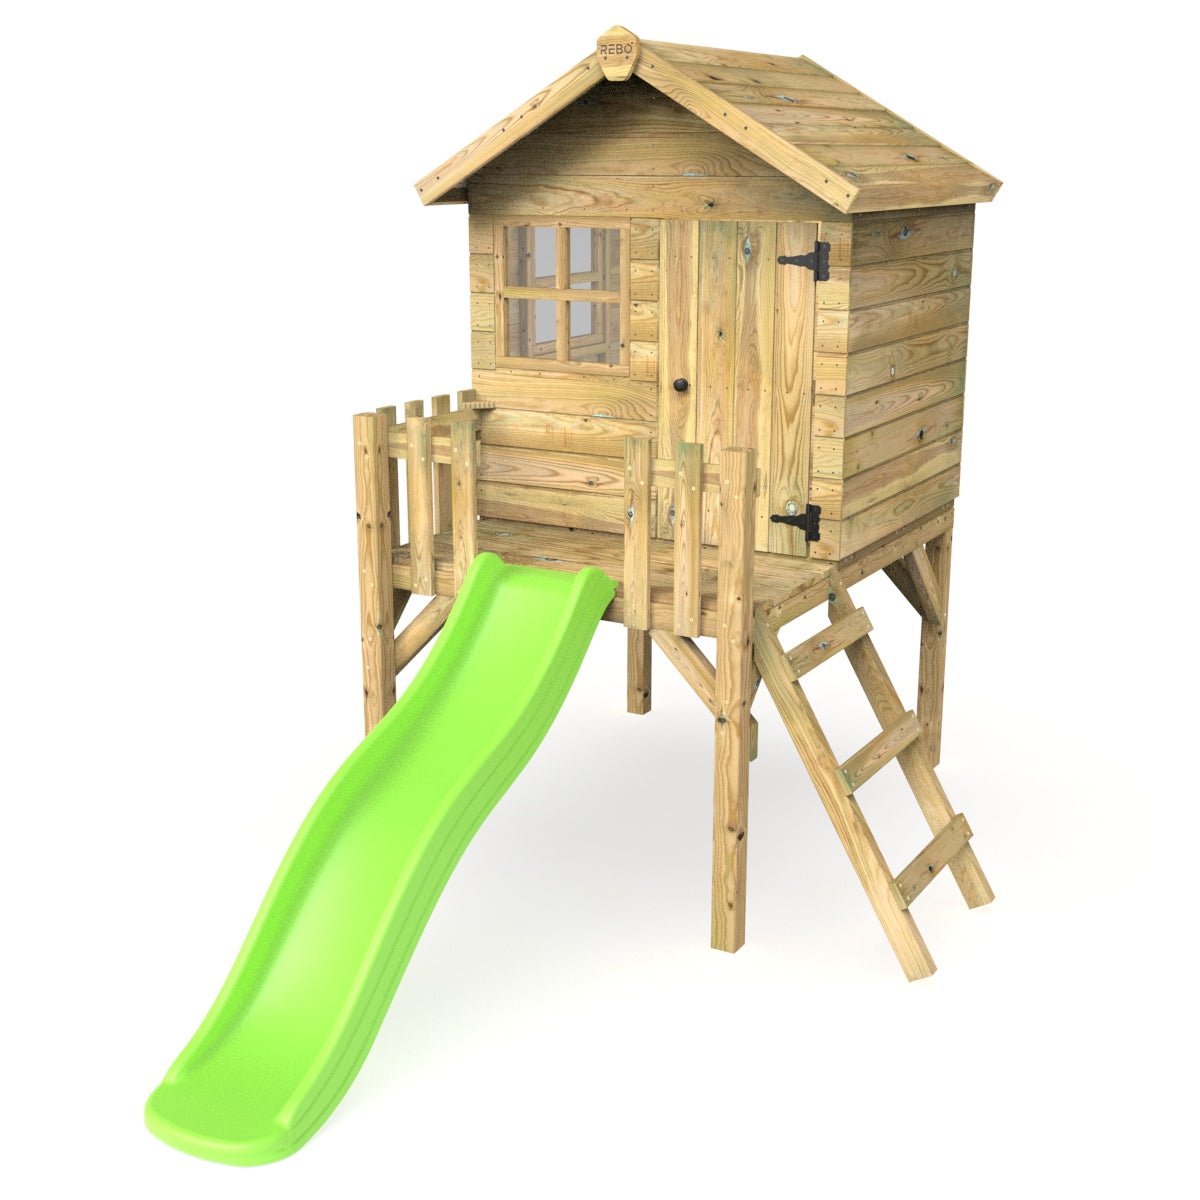 Rebo Orchard 4FT x 4FT Wooden Playhouse On 900mm Deck + 6FT Slide – Swan L Green